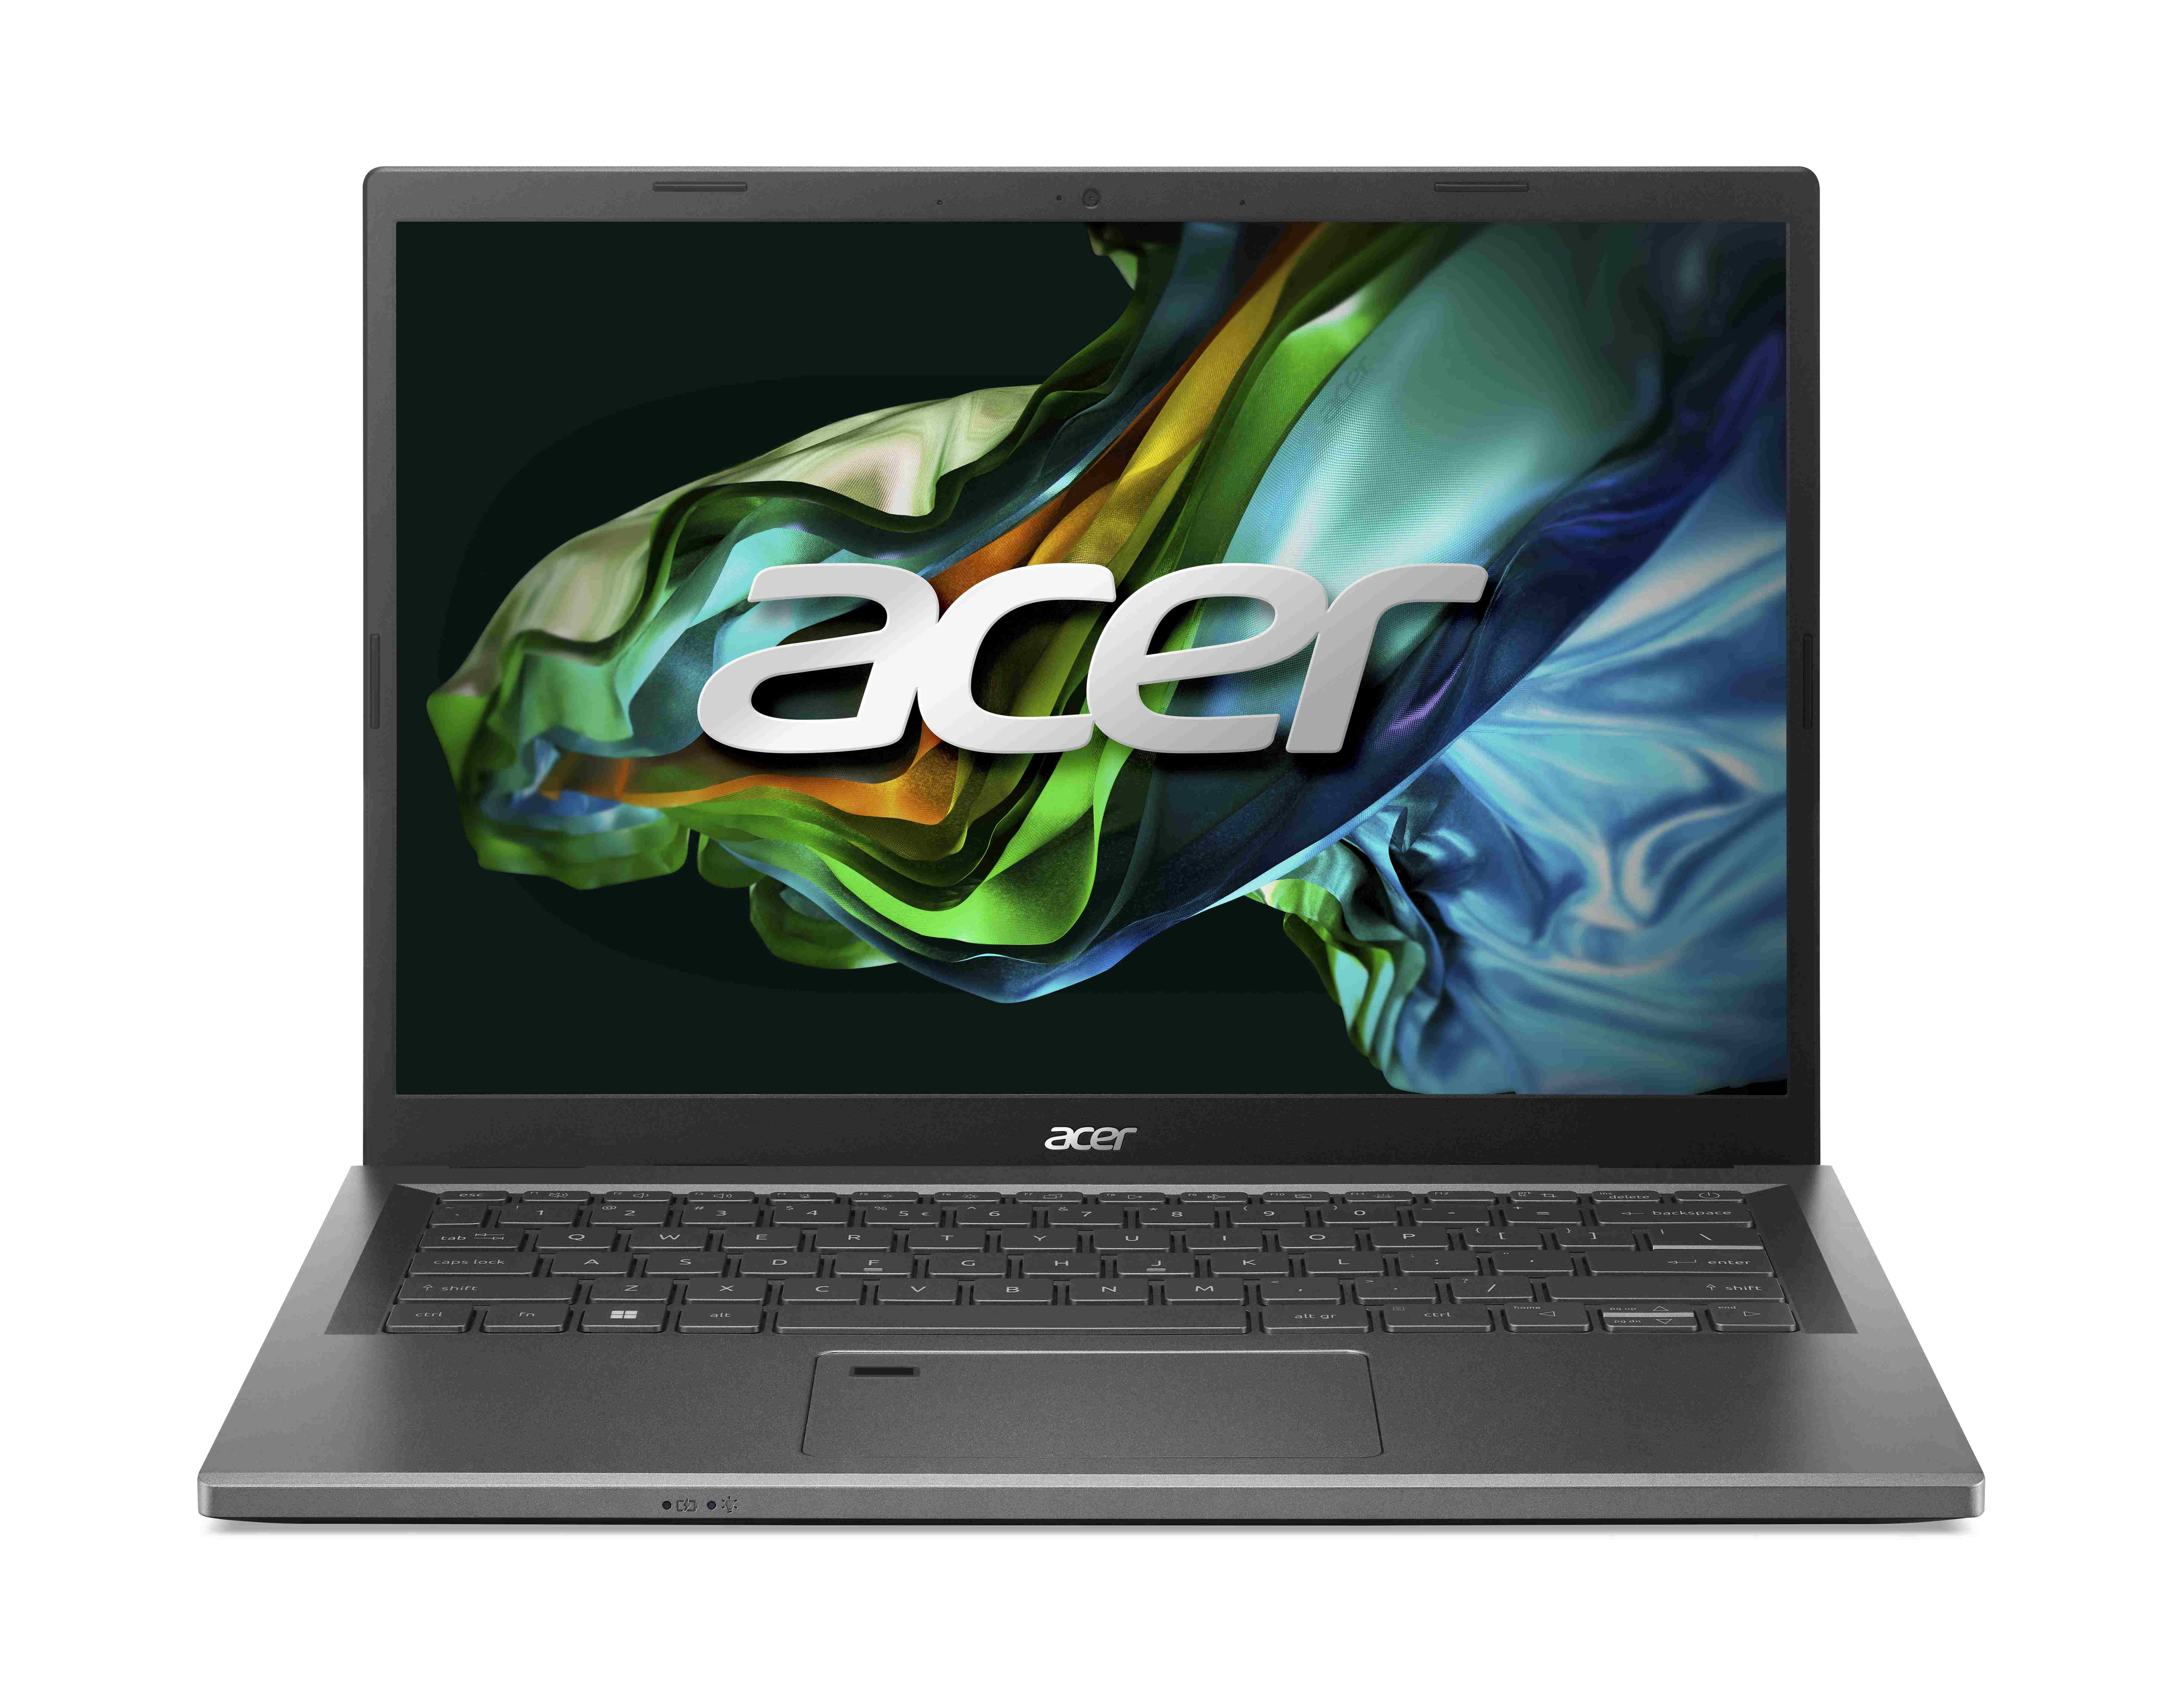 Acer India Announces the New Aspire 5 Gaming Laptop 